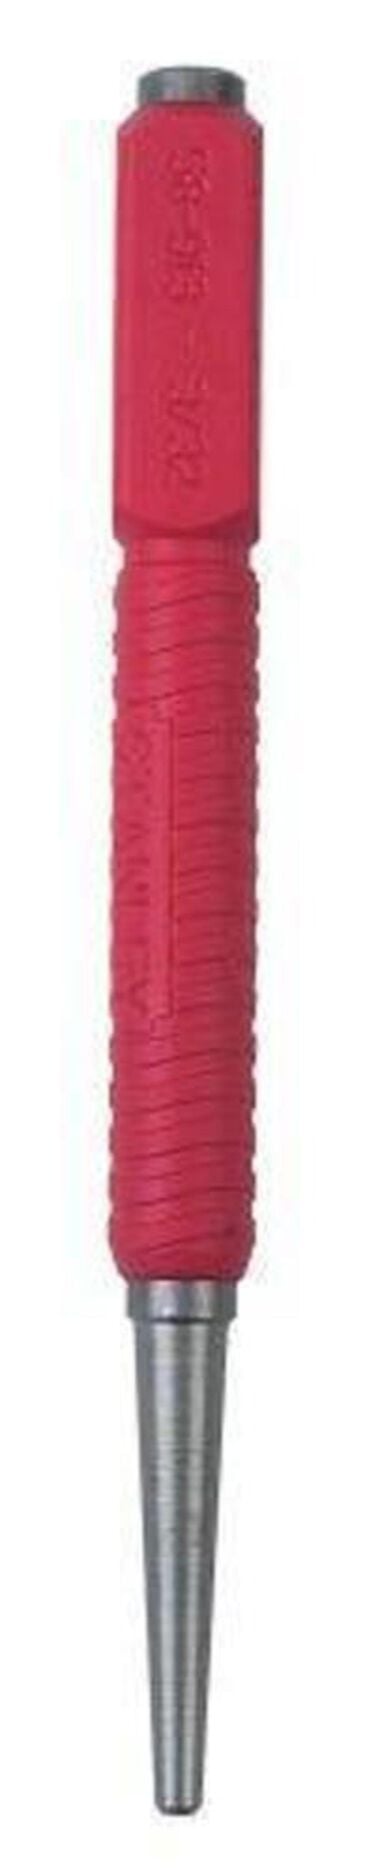 Stanley 3/32 In Tip Red Cushion Grip Nail Set, large image number 0